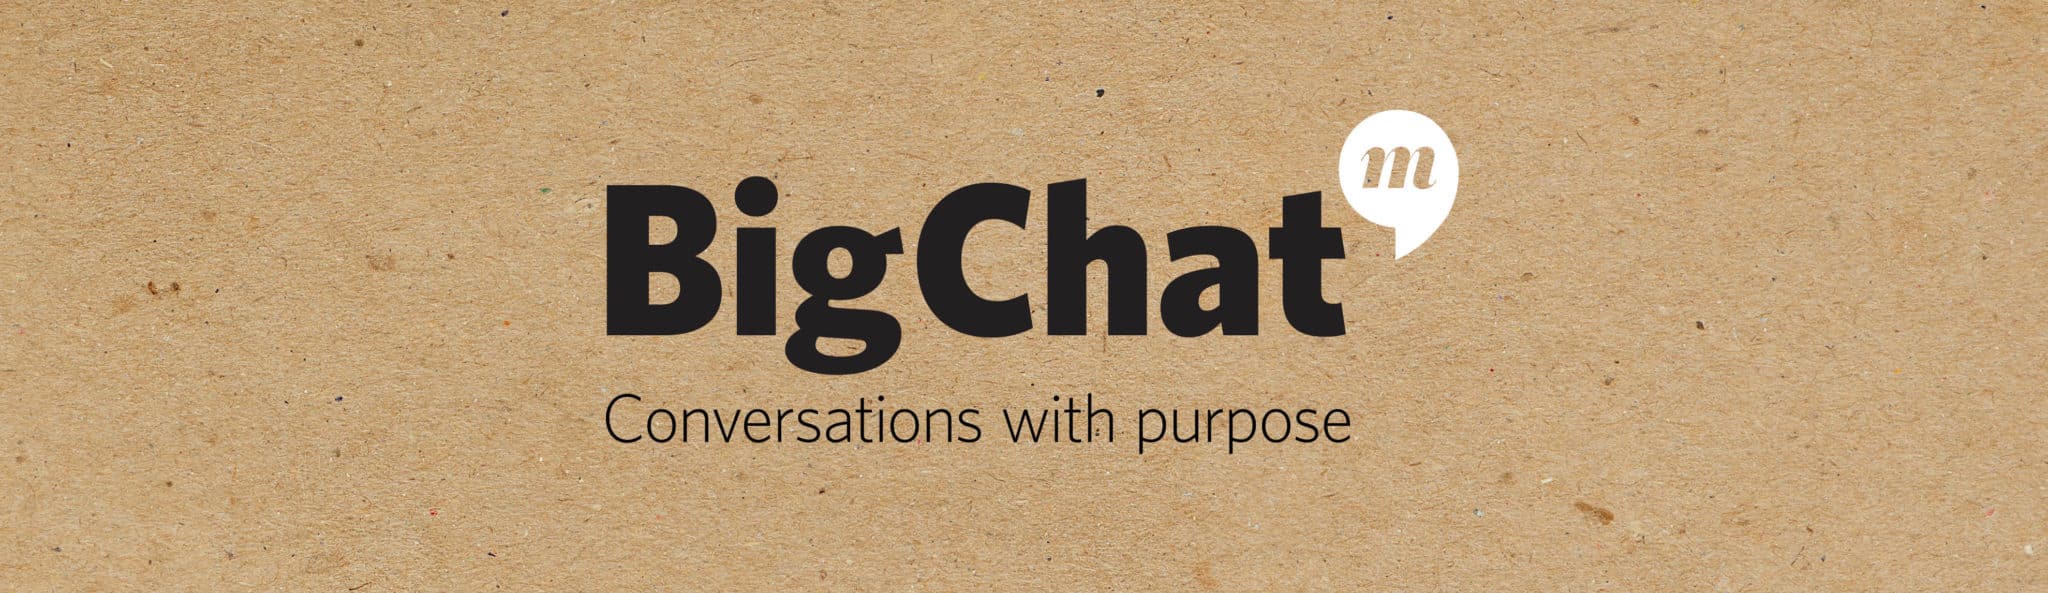 Big Chat Conversations with Purpose. Marlin Communications